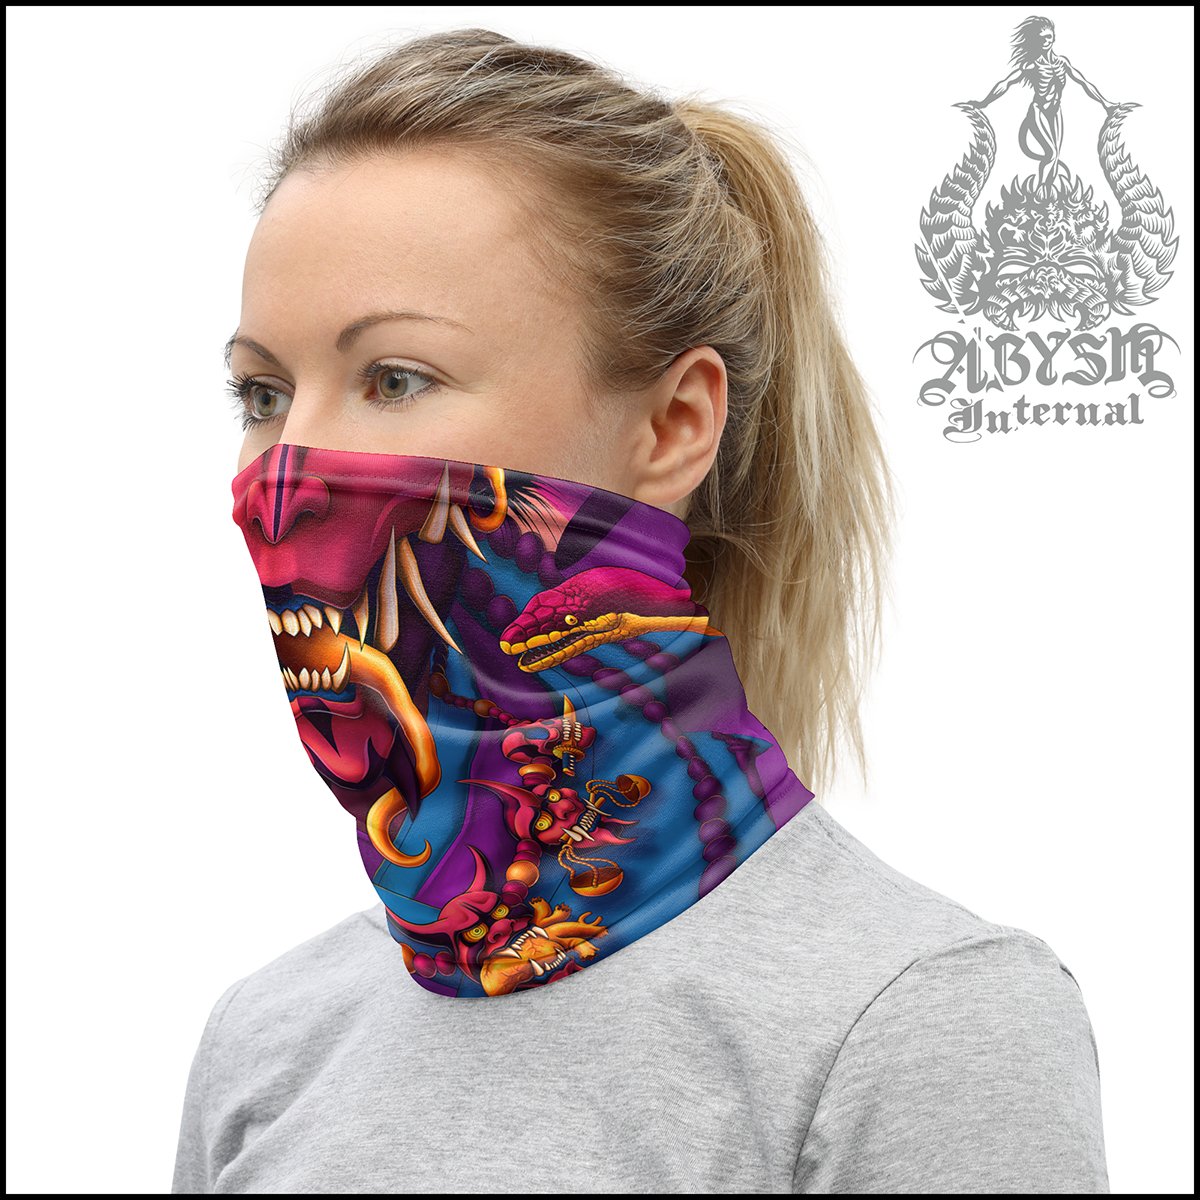 Psychedelic Oni Neck Gaiter, Trippy Hannya Face Mask, Japanese Demon Printed Head Covering, Rave Street Outfit, Snake, Fangs, Headband - Vaporwave - Abysm Internal